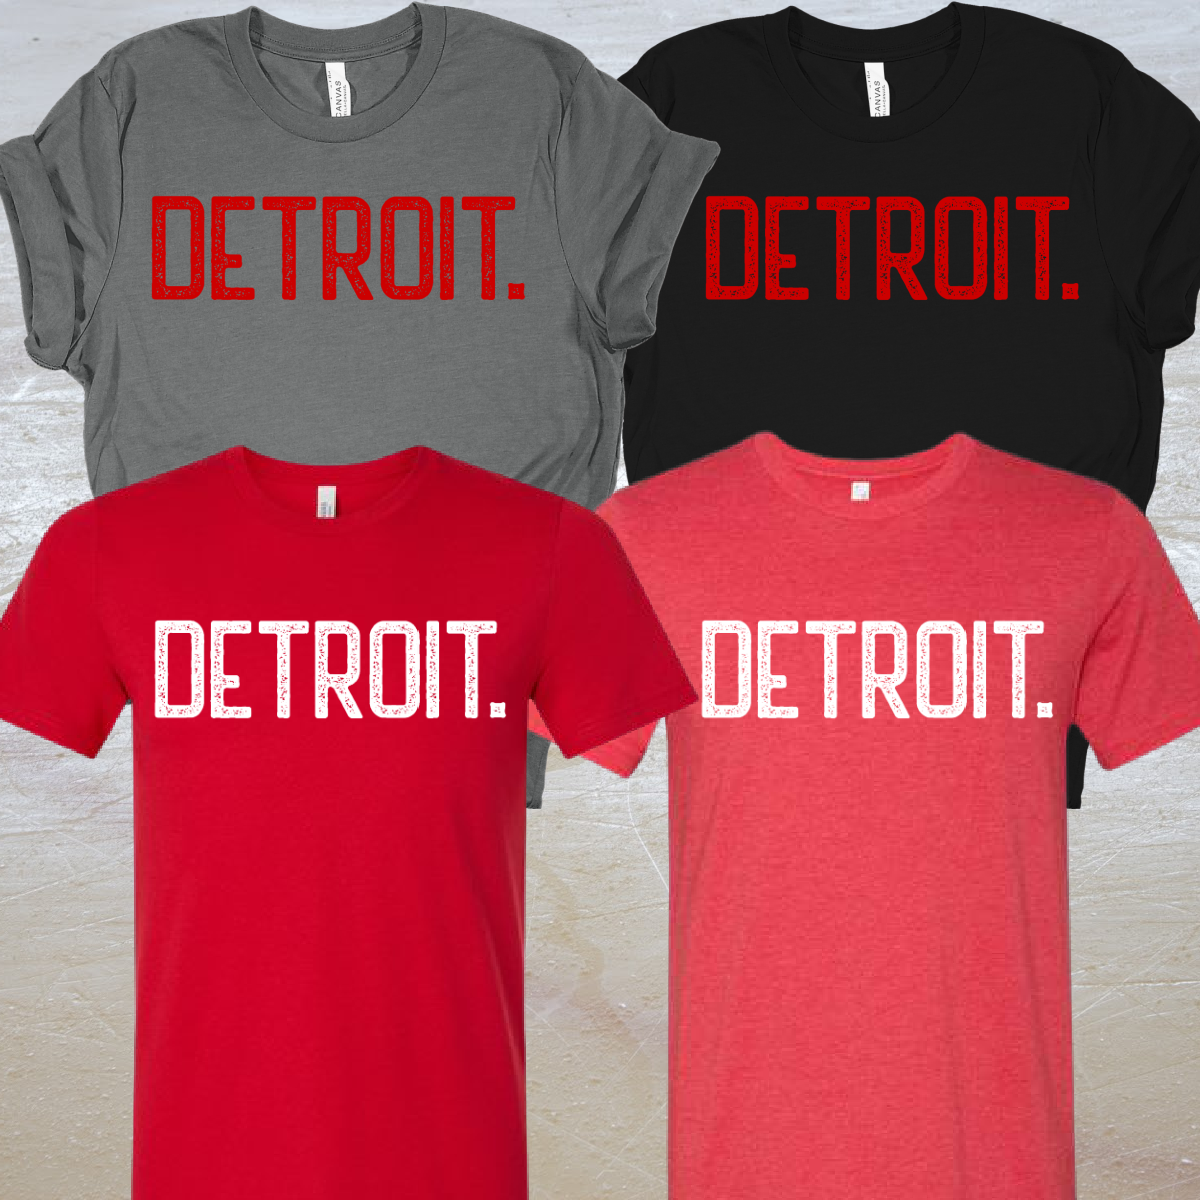 DETROIT.  Tees (Adult) - PREORDER - WILL SHIP BY 3/11